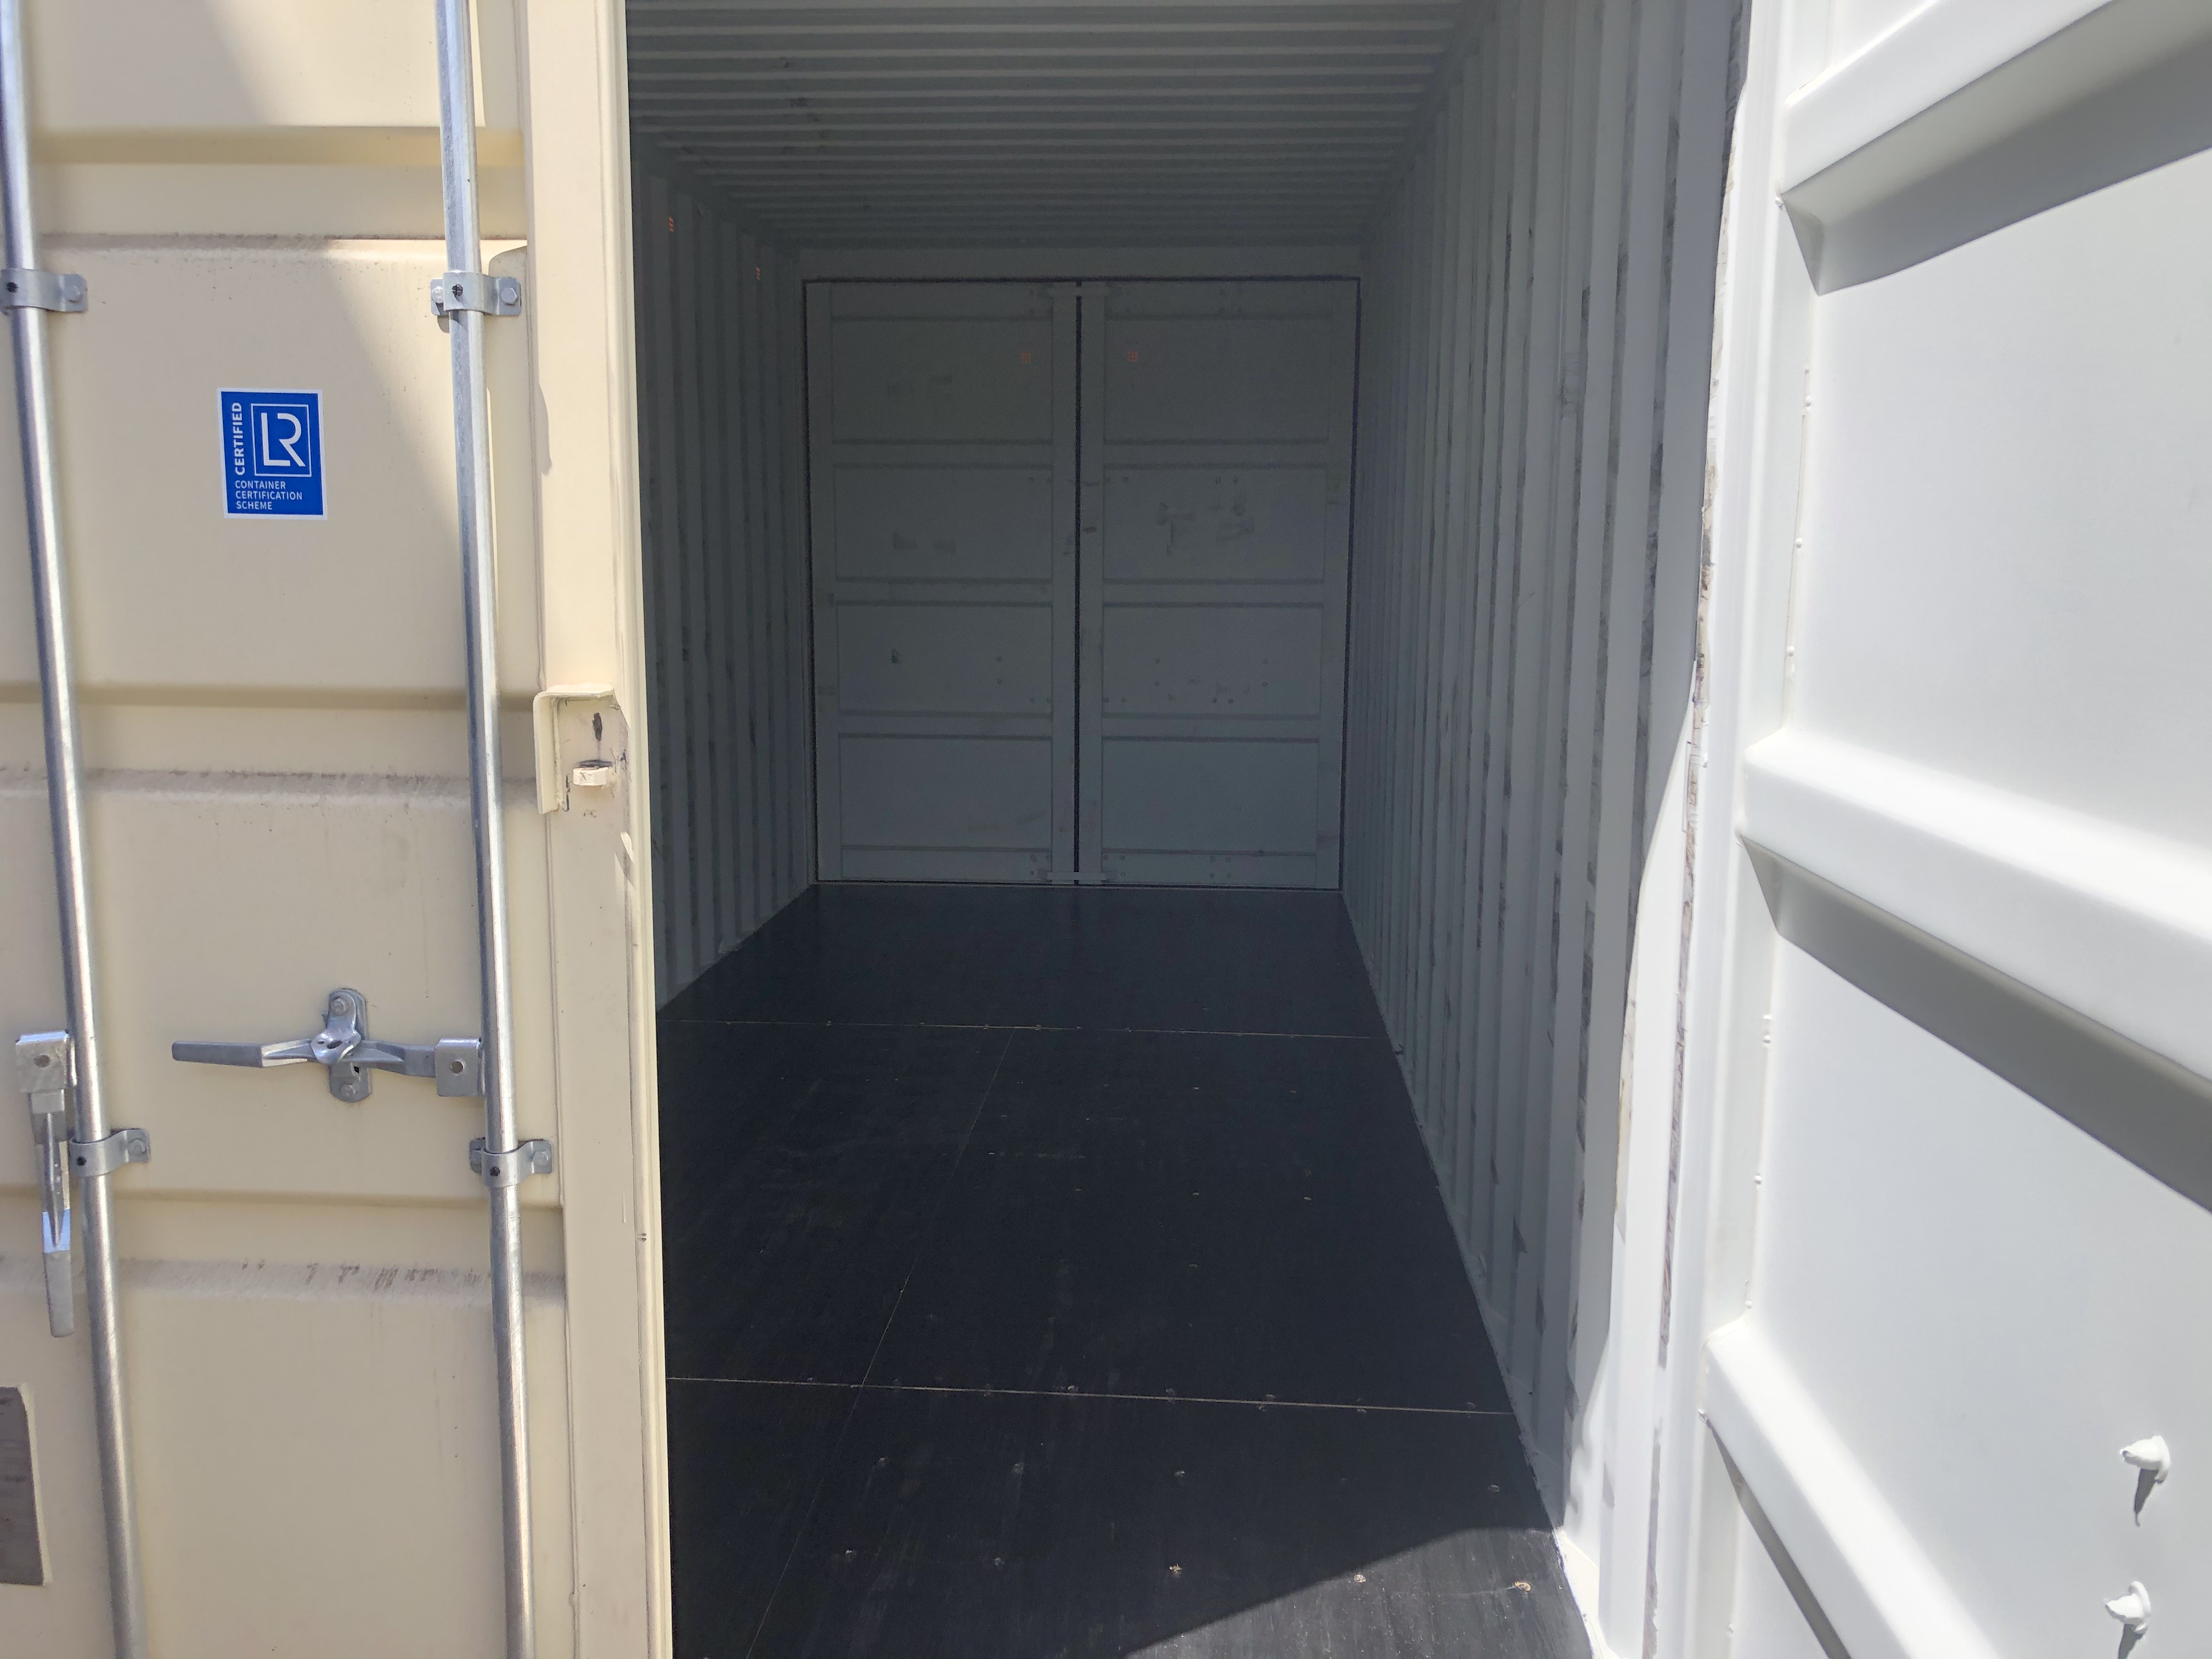 20ft new double door high cube shipping container.